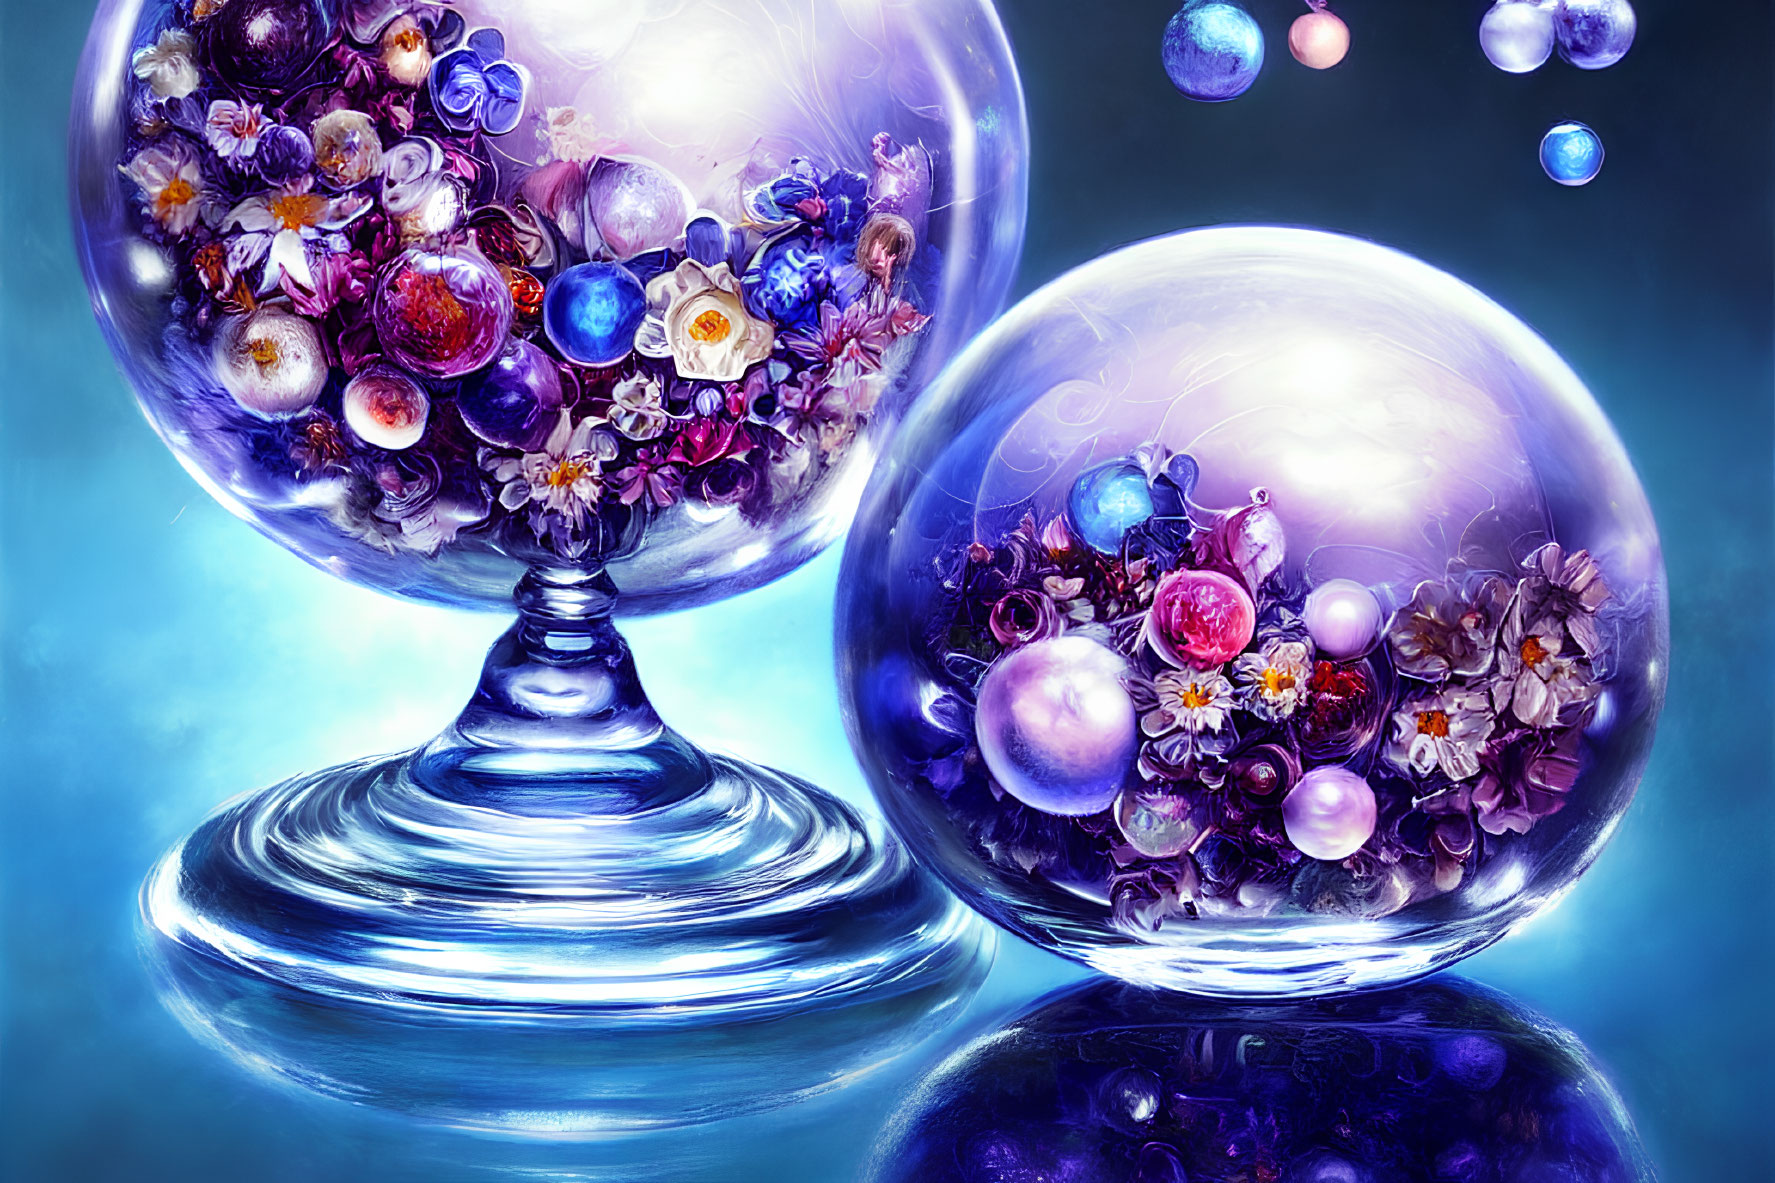 Colorful flowers and bubbles in glass vessels on blue background